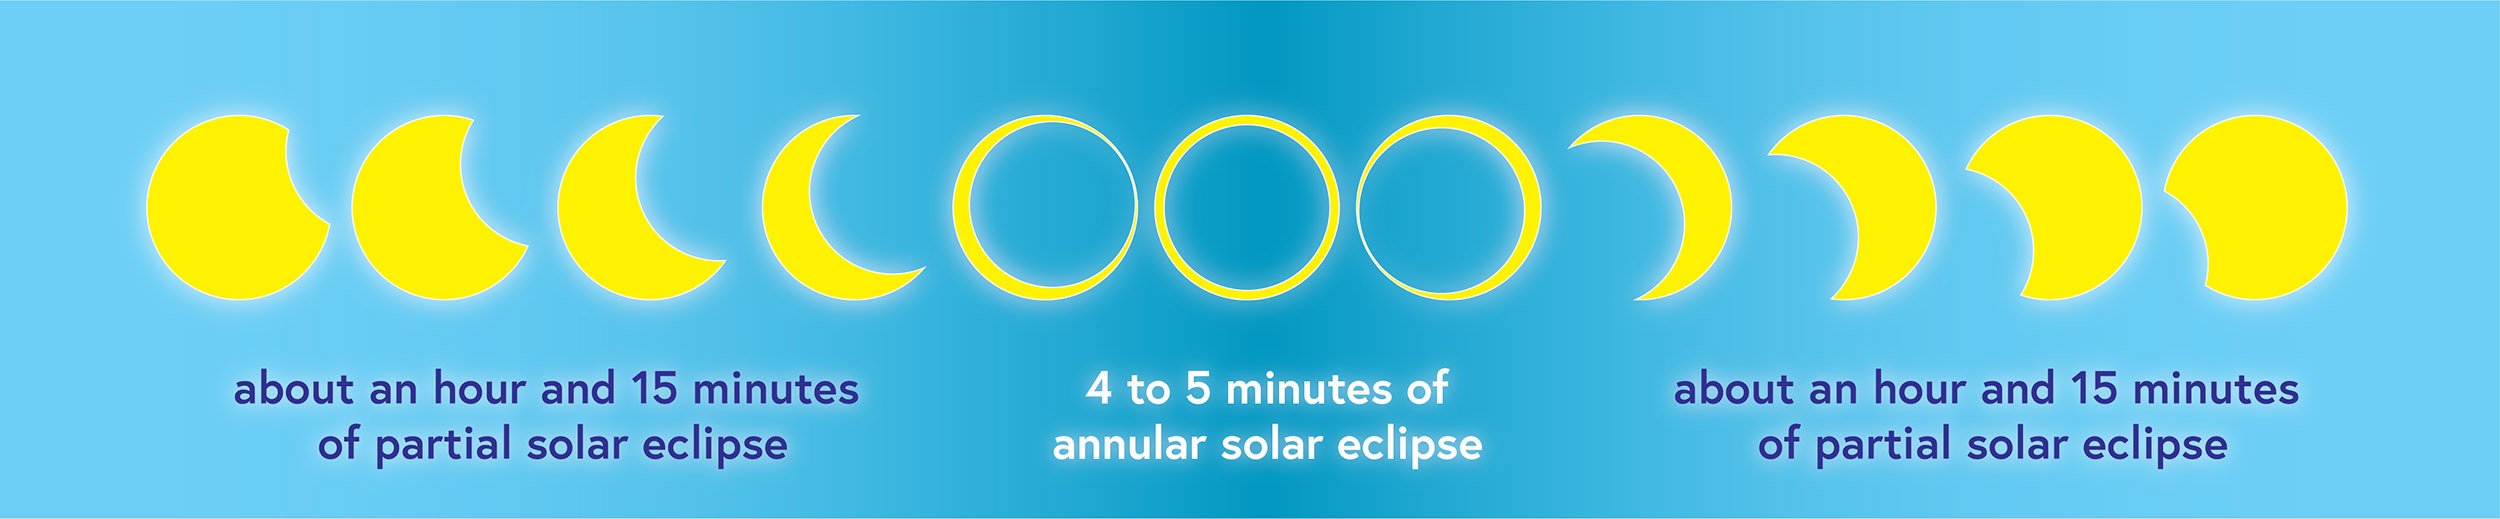 Eclipse, Annular images 2023